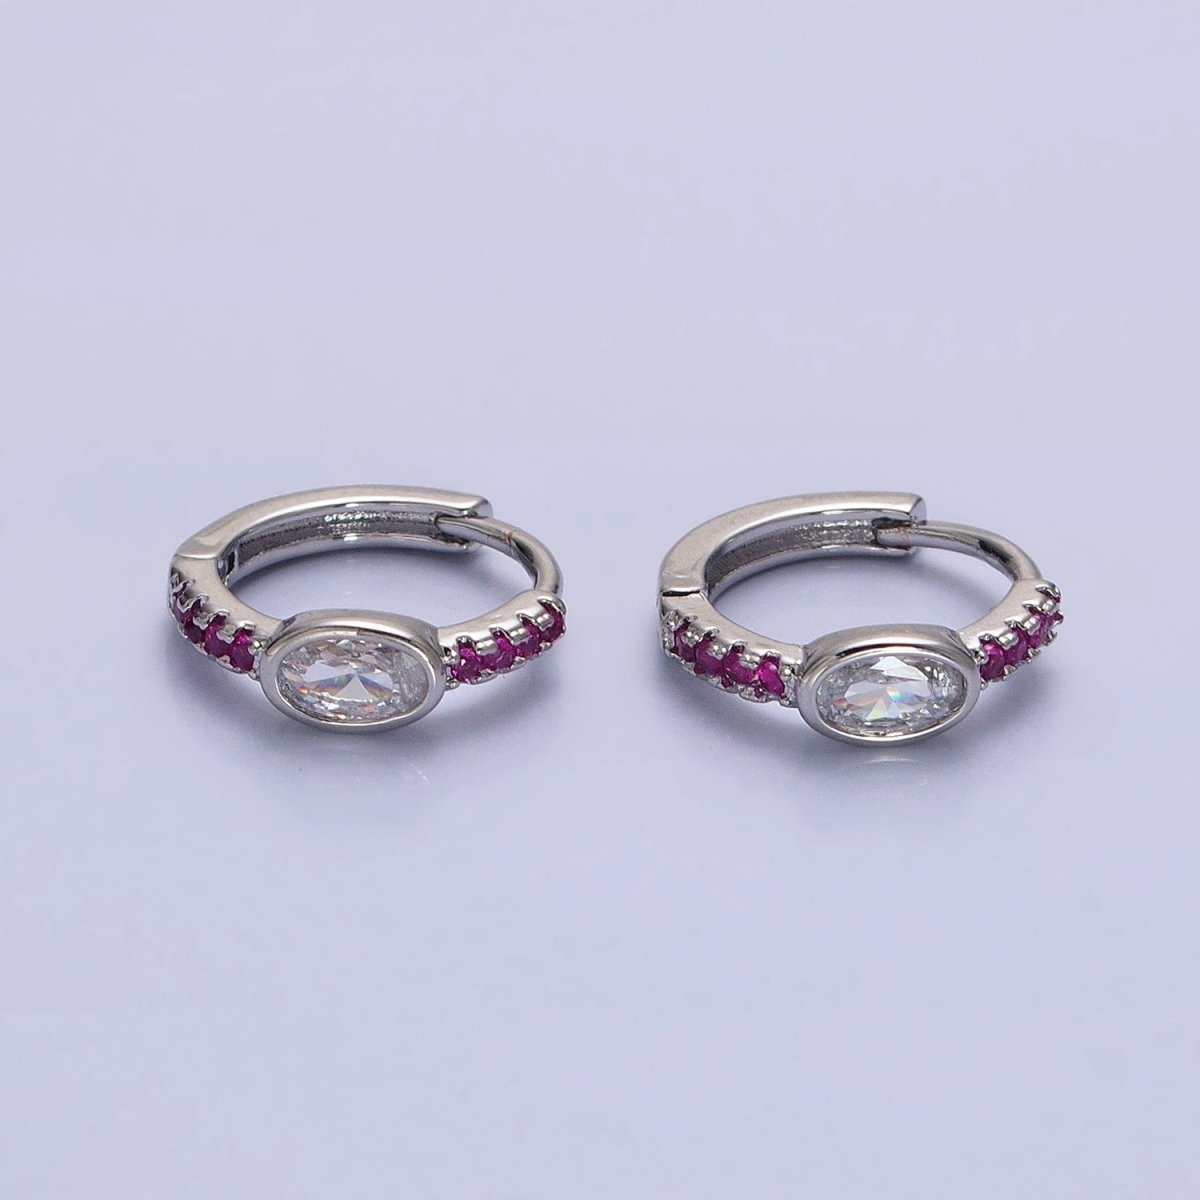 Silver, Gold Fuchsia Micro Paved Lined Clear Oval CZ 13mm Cartilage Huggie Earrings | AB814 AB826 - DLUXCA